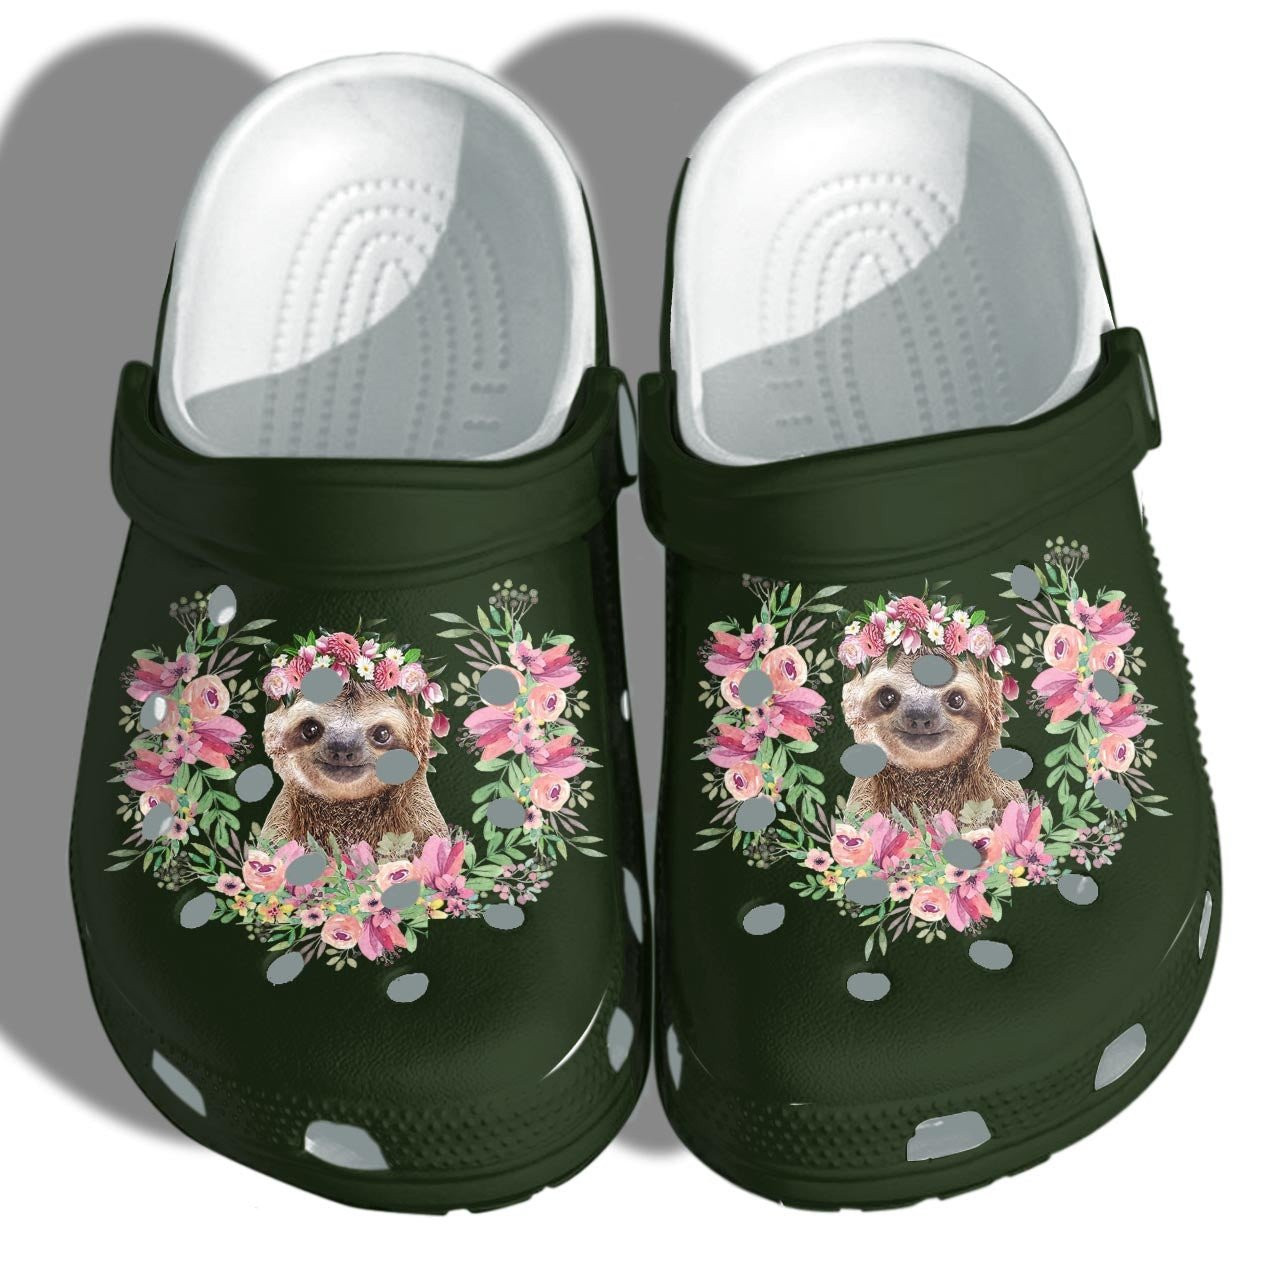 Sloth Flower Crocs Shoes Clogs Gifts For Daughter - Girl Loves Sloth Cute Custom Crocs Shoes Clogs Gifts Birthday For Women